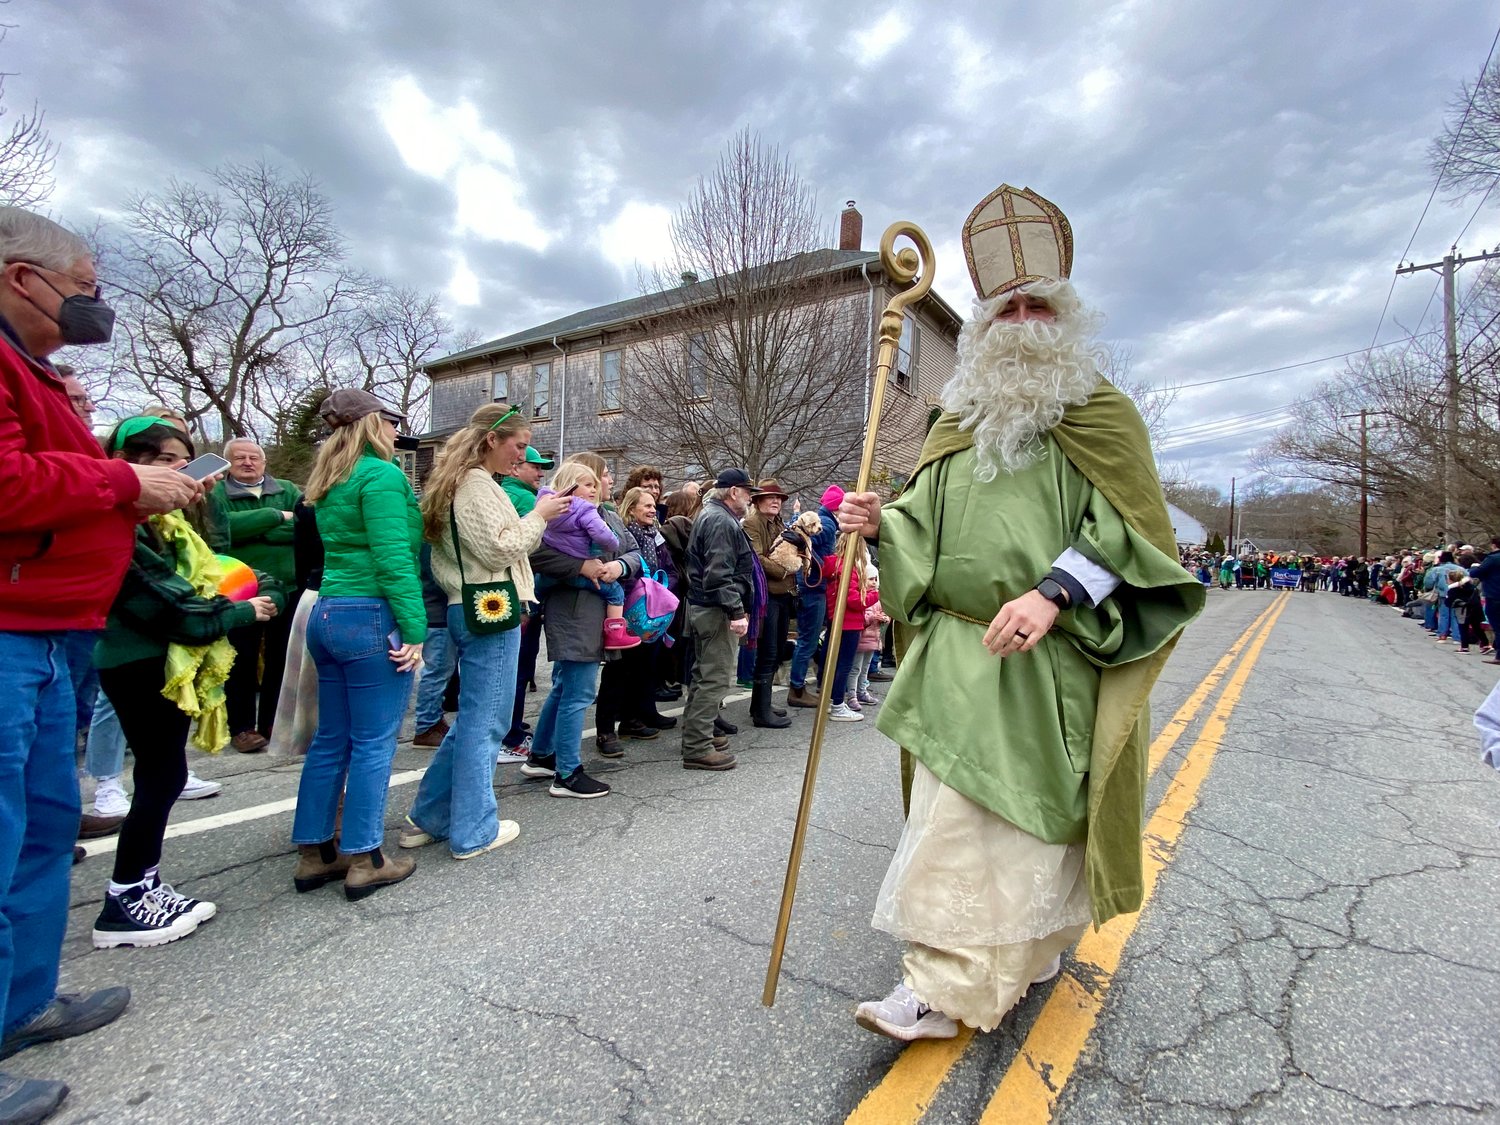 St. Patrick, the man of the hour, brought loud cheers as he made his way down the route.